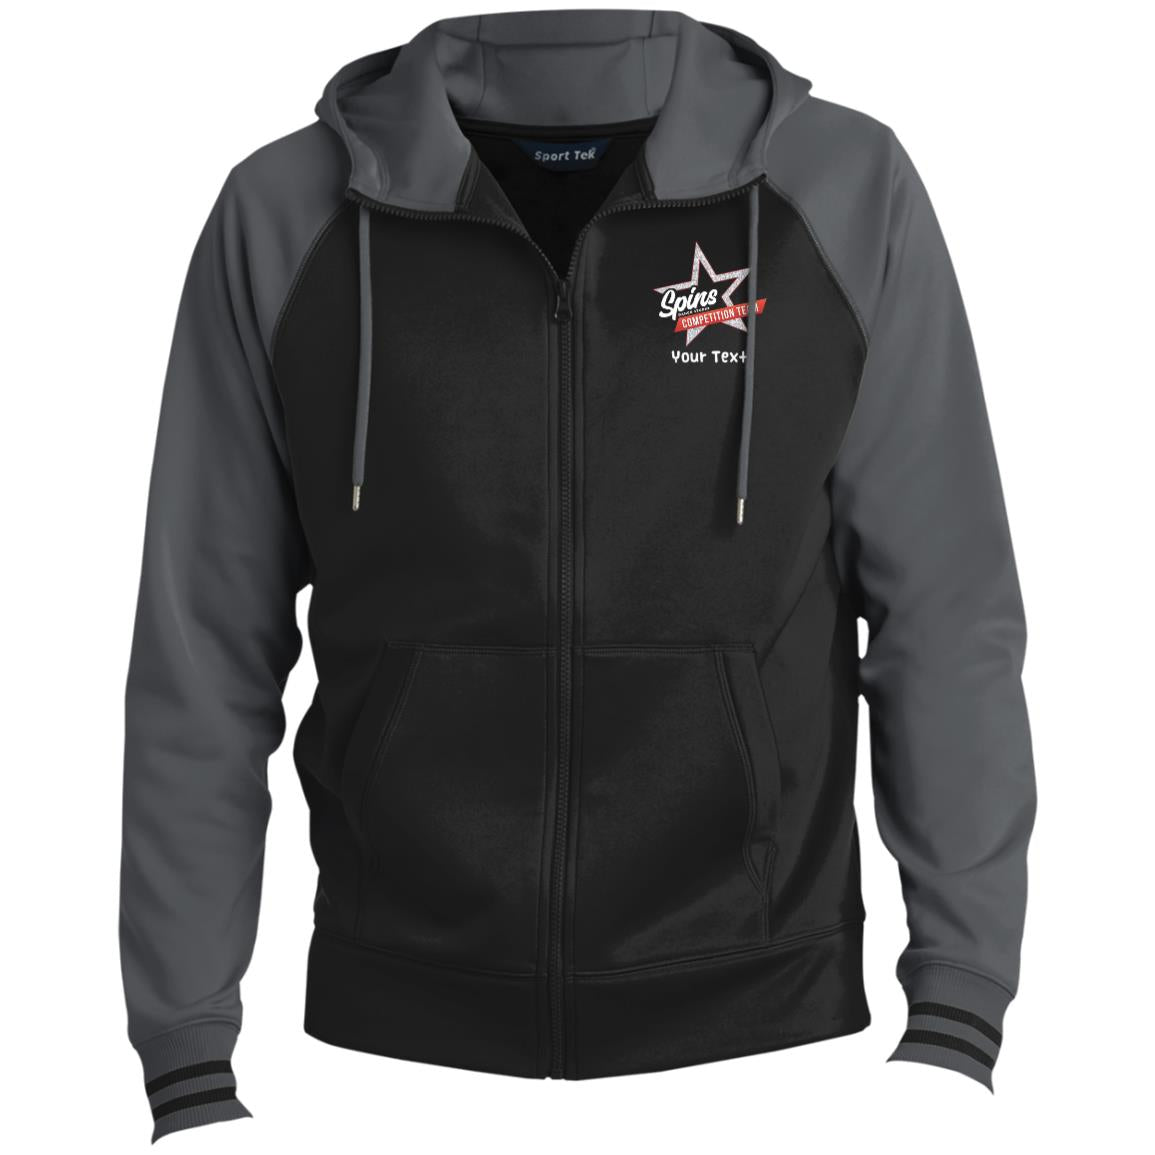 Spins Competition team Sport-Wick® Full-Zip Hooded Jacket - With Personalization